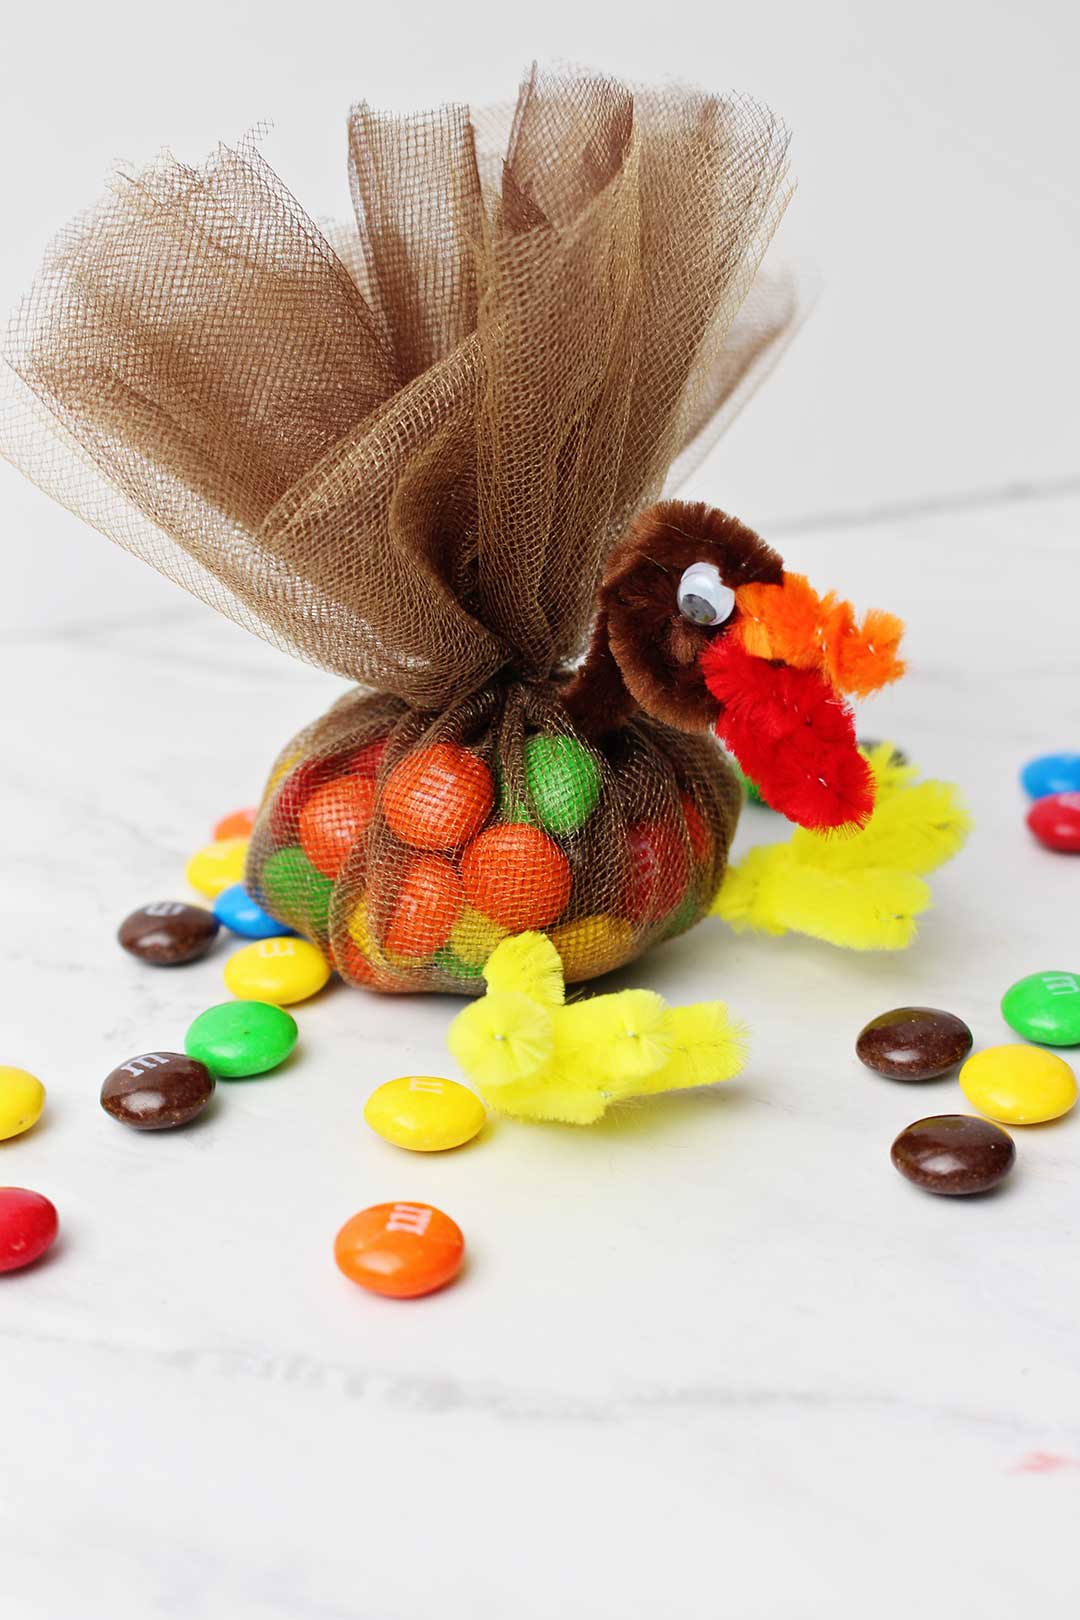 Completed Cute Turkey Thanksgiving Favor. Tulle filled with m&ms secured on top to make feathers and a turkey face made of pipe cleaners.